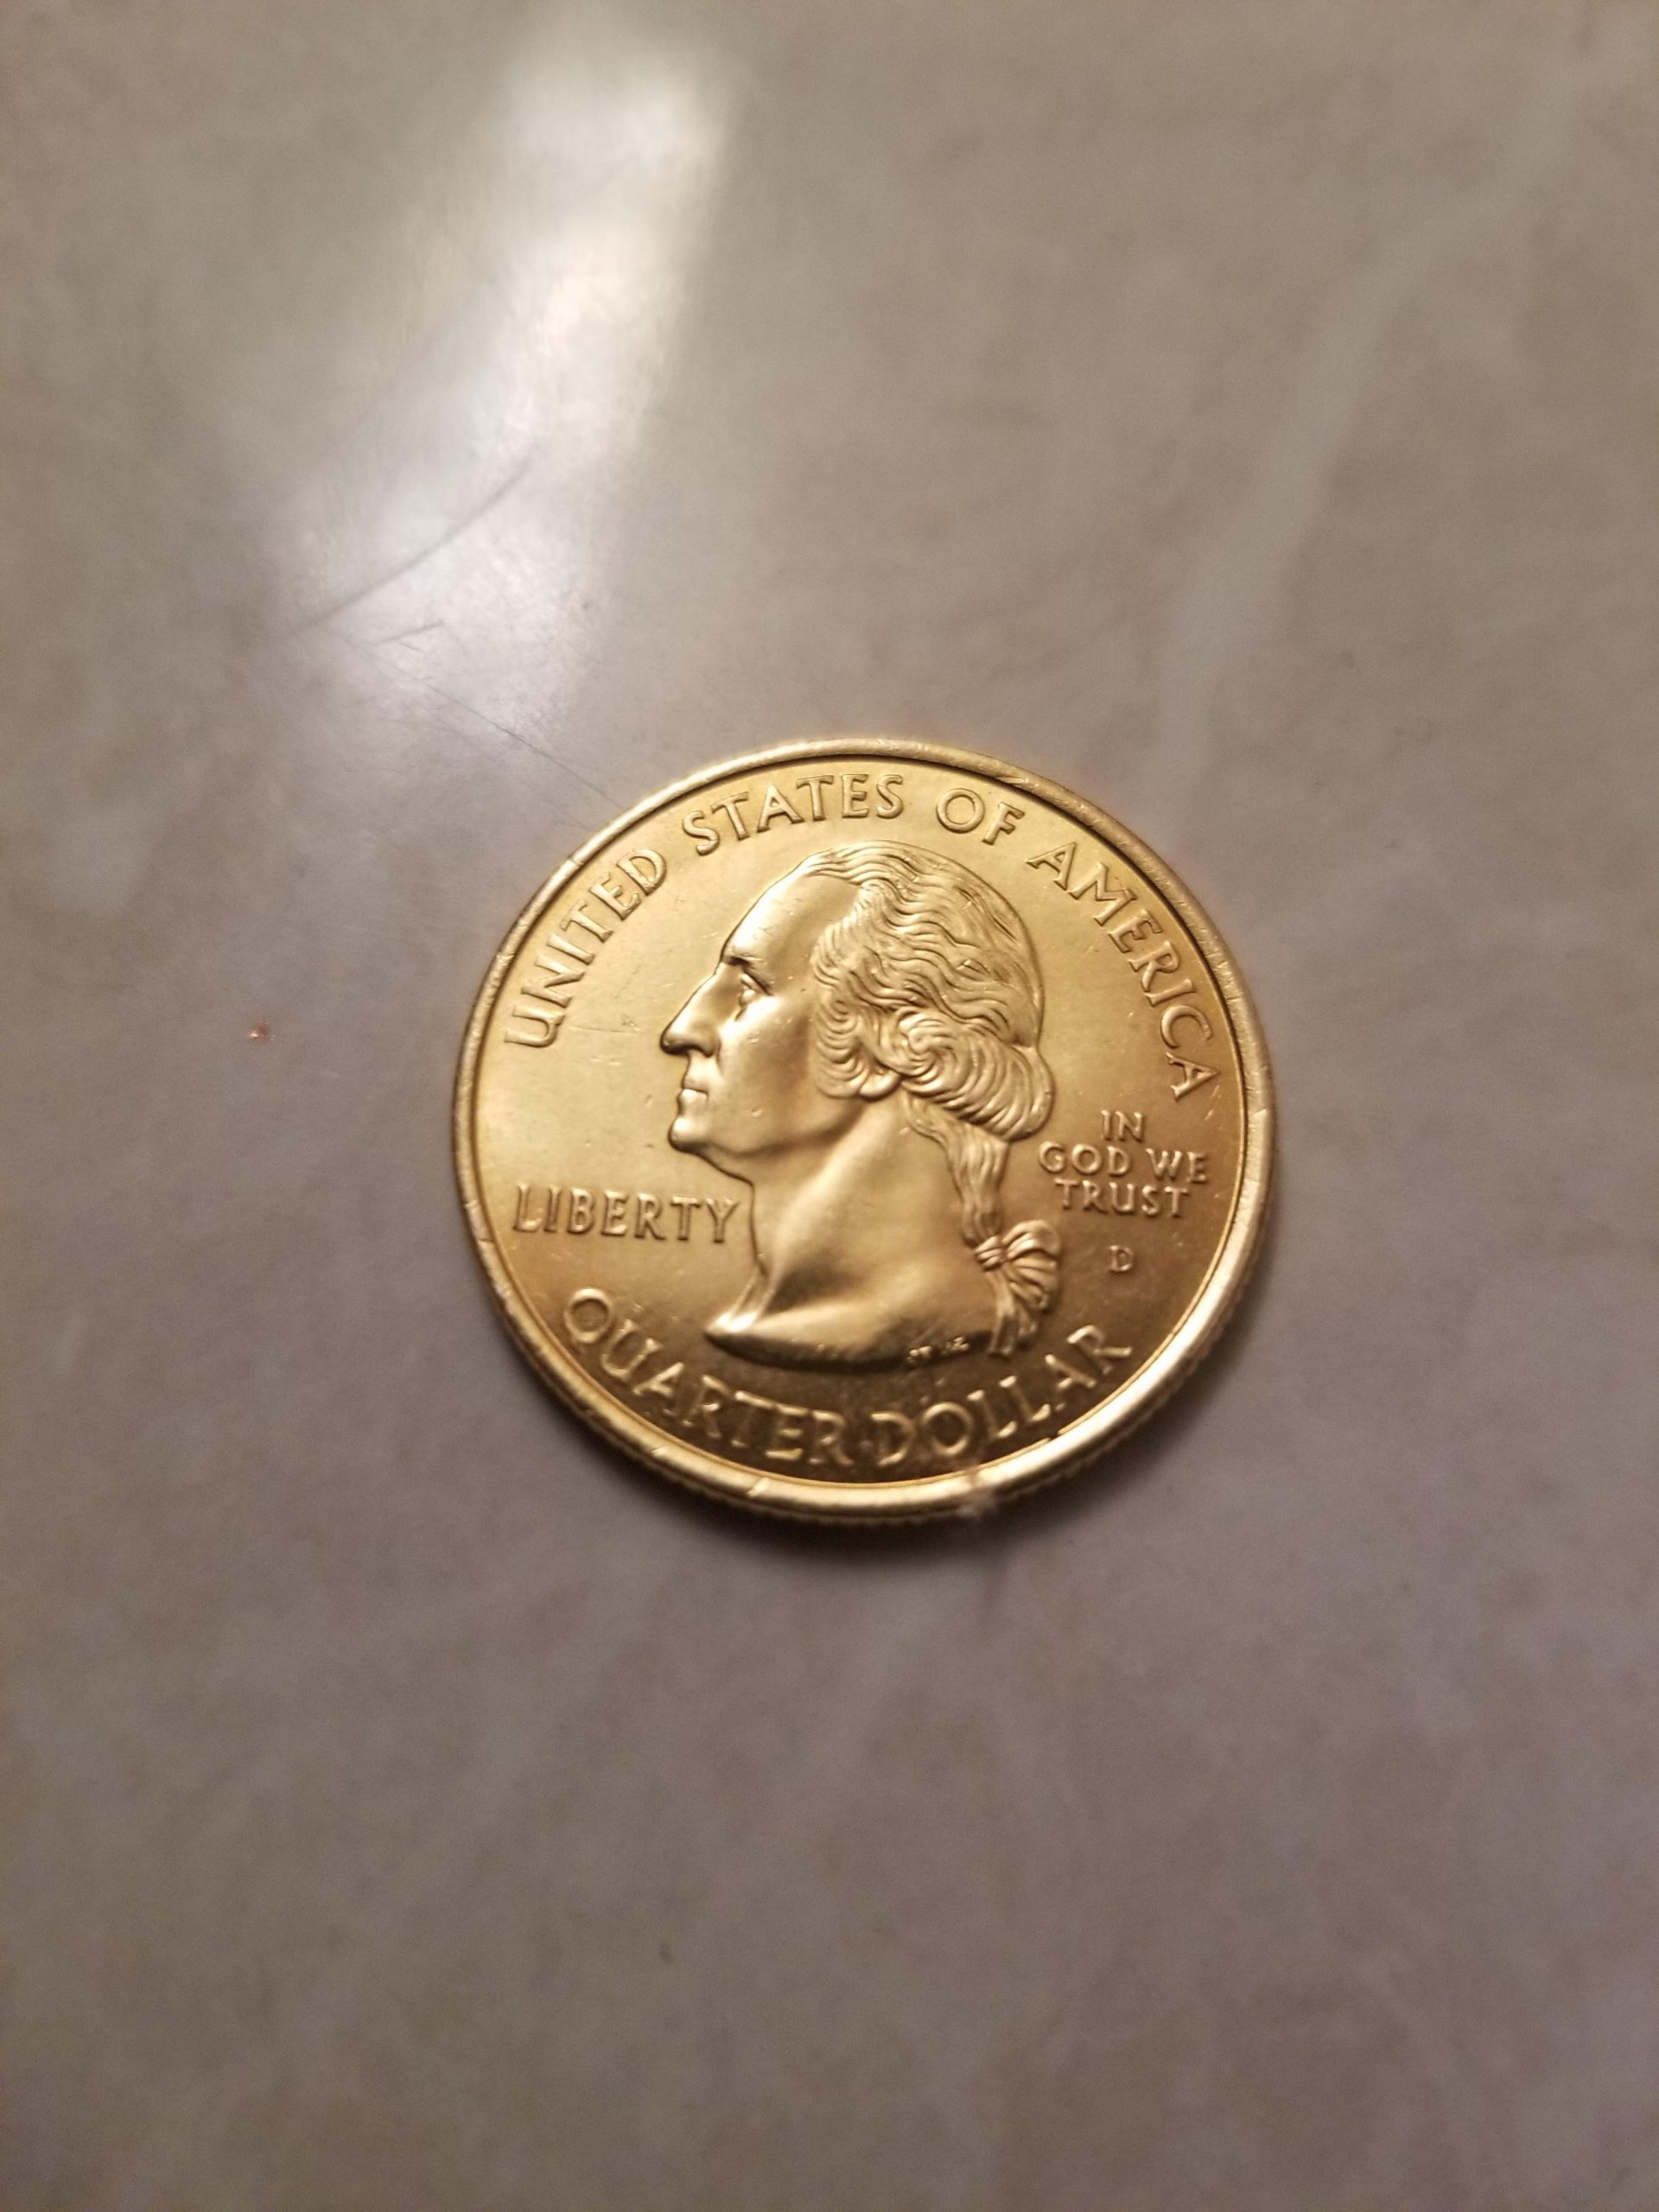 How Much Is A Gold Plated Quarter Worth? | Gold IRA Guide